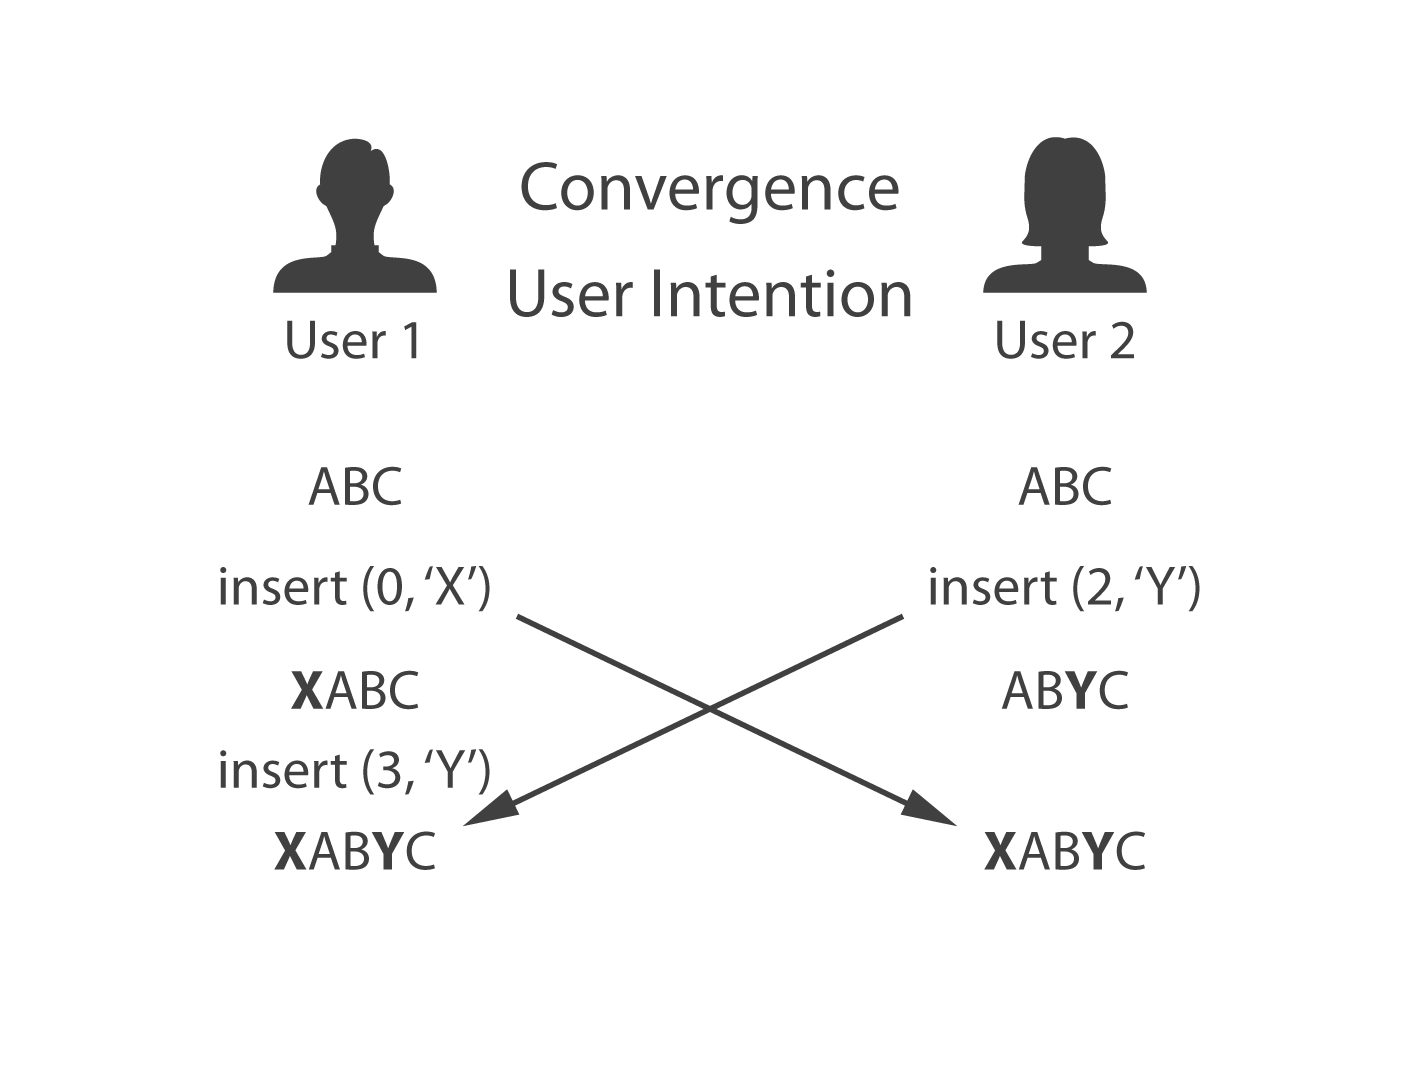 Diagram: Convergence in Real Time Collaboration